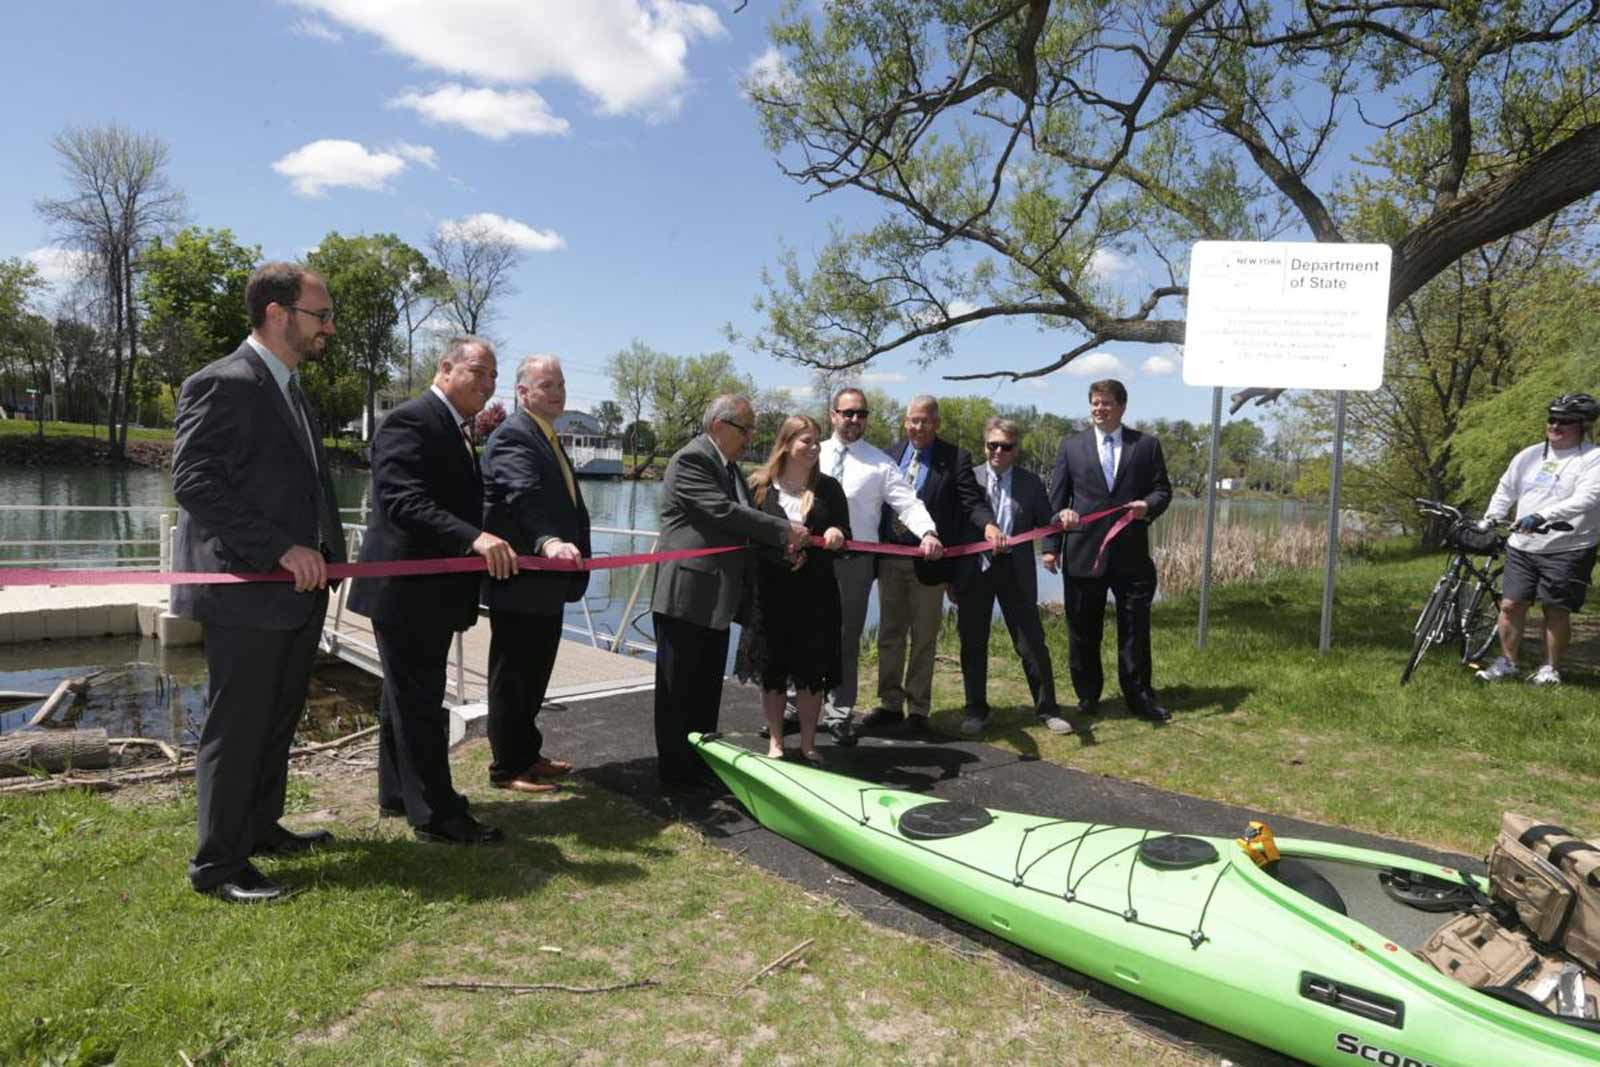 New kayak launch and bike path extension unveiled along the Erie Canal in North Tonawanda Image